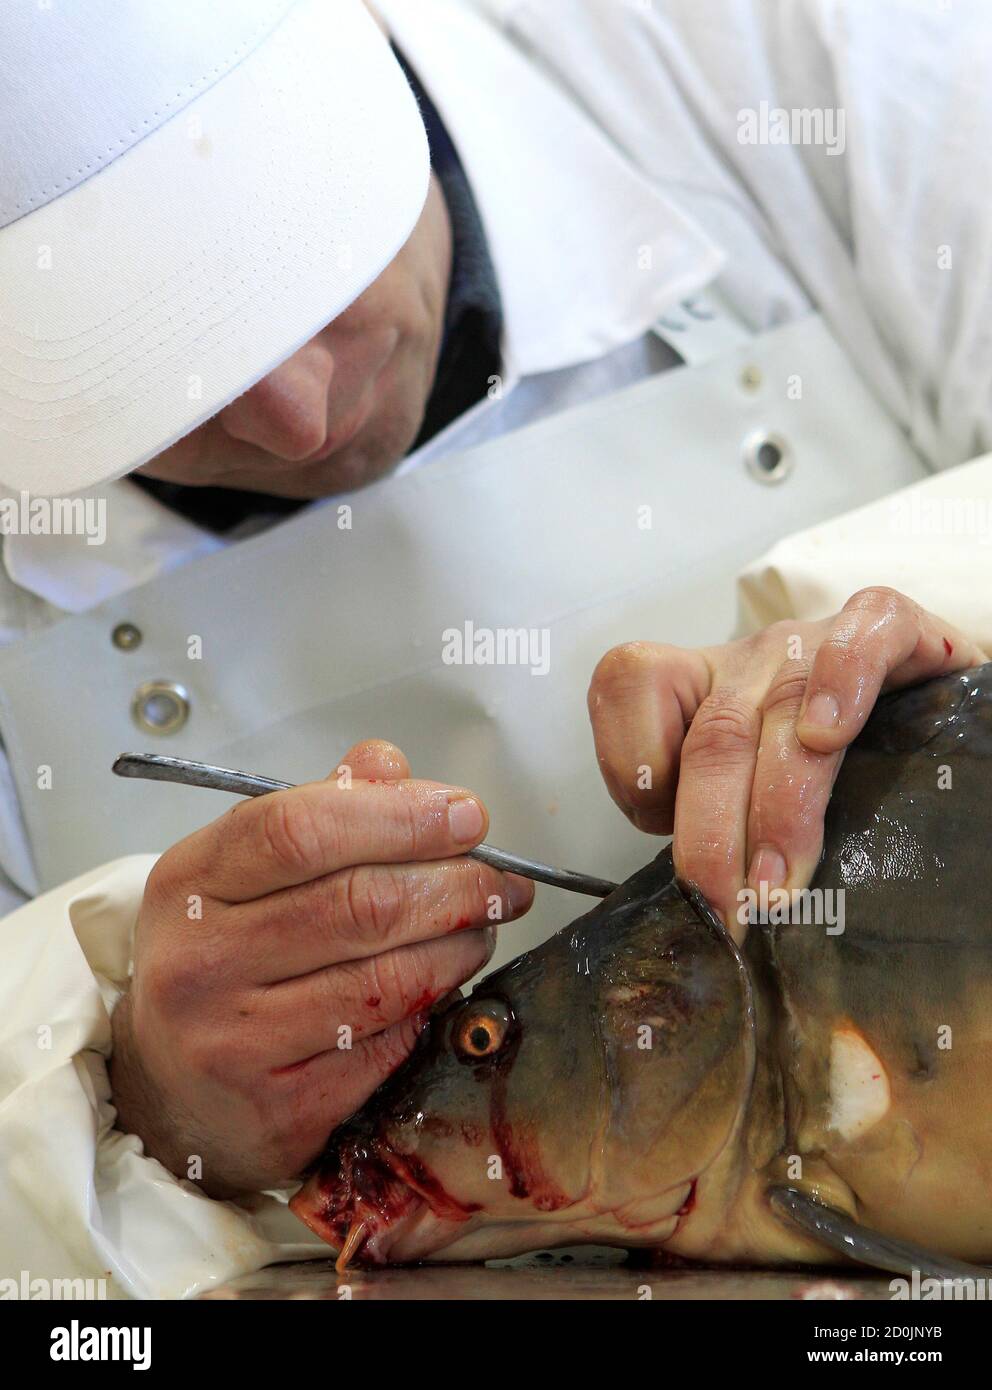 An employee removes a carp's hypophysis glands at a state fish farm in the village of Aziorny, some 50 km (31 miles) east of Minsk March 16, 2011. The gland is used to stimulate the excretion of a hormone, which when injected into other carps speeds up spawning independent of weather conditions.  REUTERS/Vasily Fedosenko  (BELARUS - Tags: ANIMALS ENVIRONMENT SOCIETY IMAGES OF THE DAY) Stock Photo